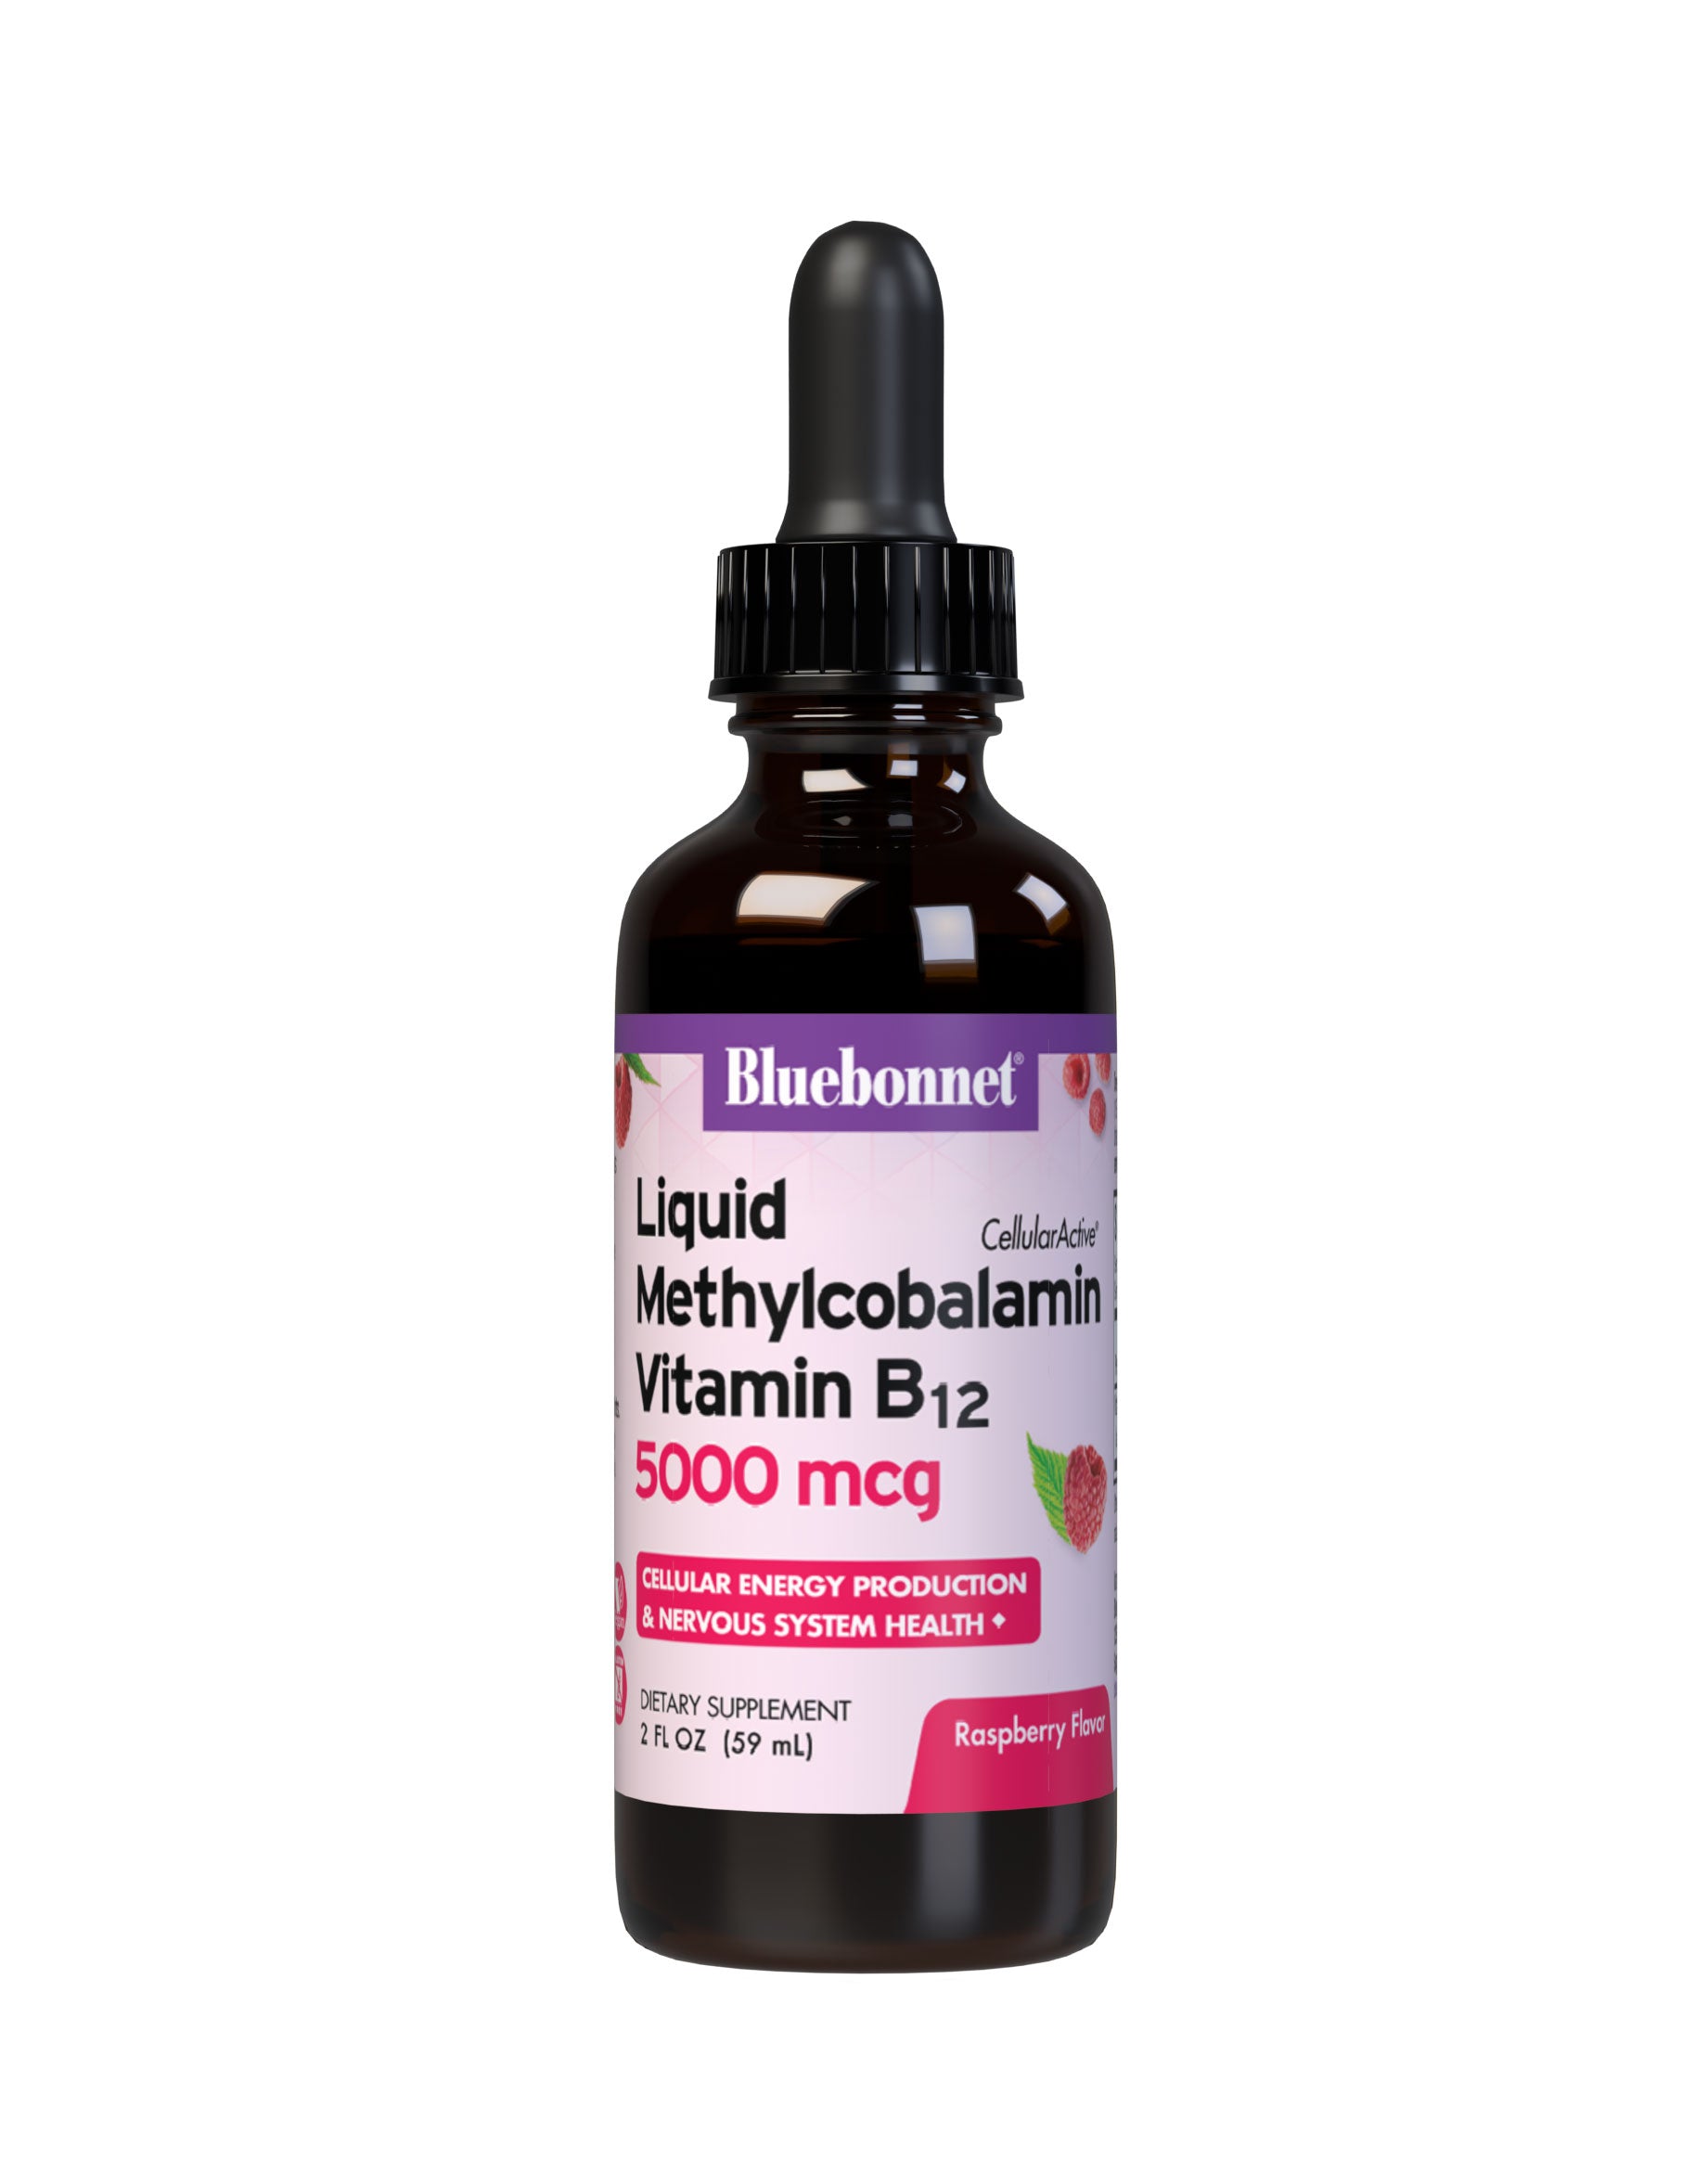 Bluebonnet’s Liquid CellularActive Methylcobalamin Vitamin B12 5000 mcg is formulated with fast-acting vitamin B12 as methylcobalamin, a coenzyme form of B12, which may be better utilized and better retained in the body. Vitamin B12 supports cellular energy production and nervous system health. #size_2 fl oz